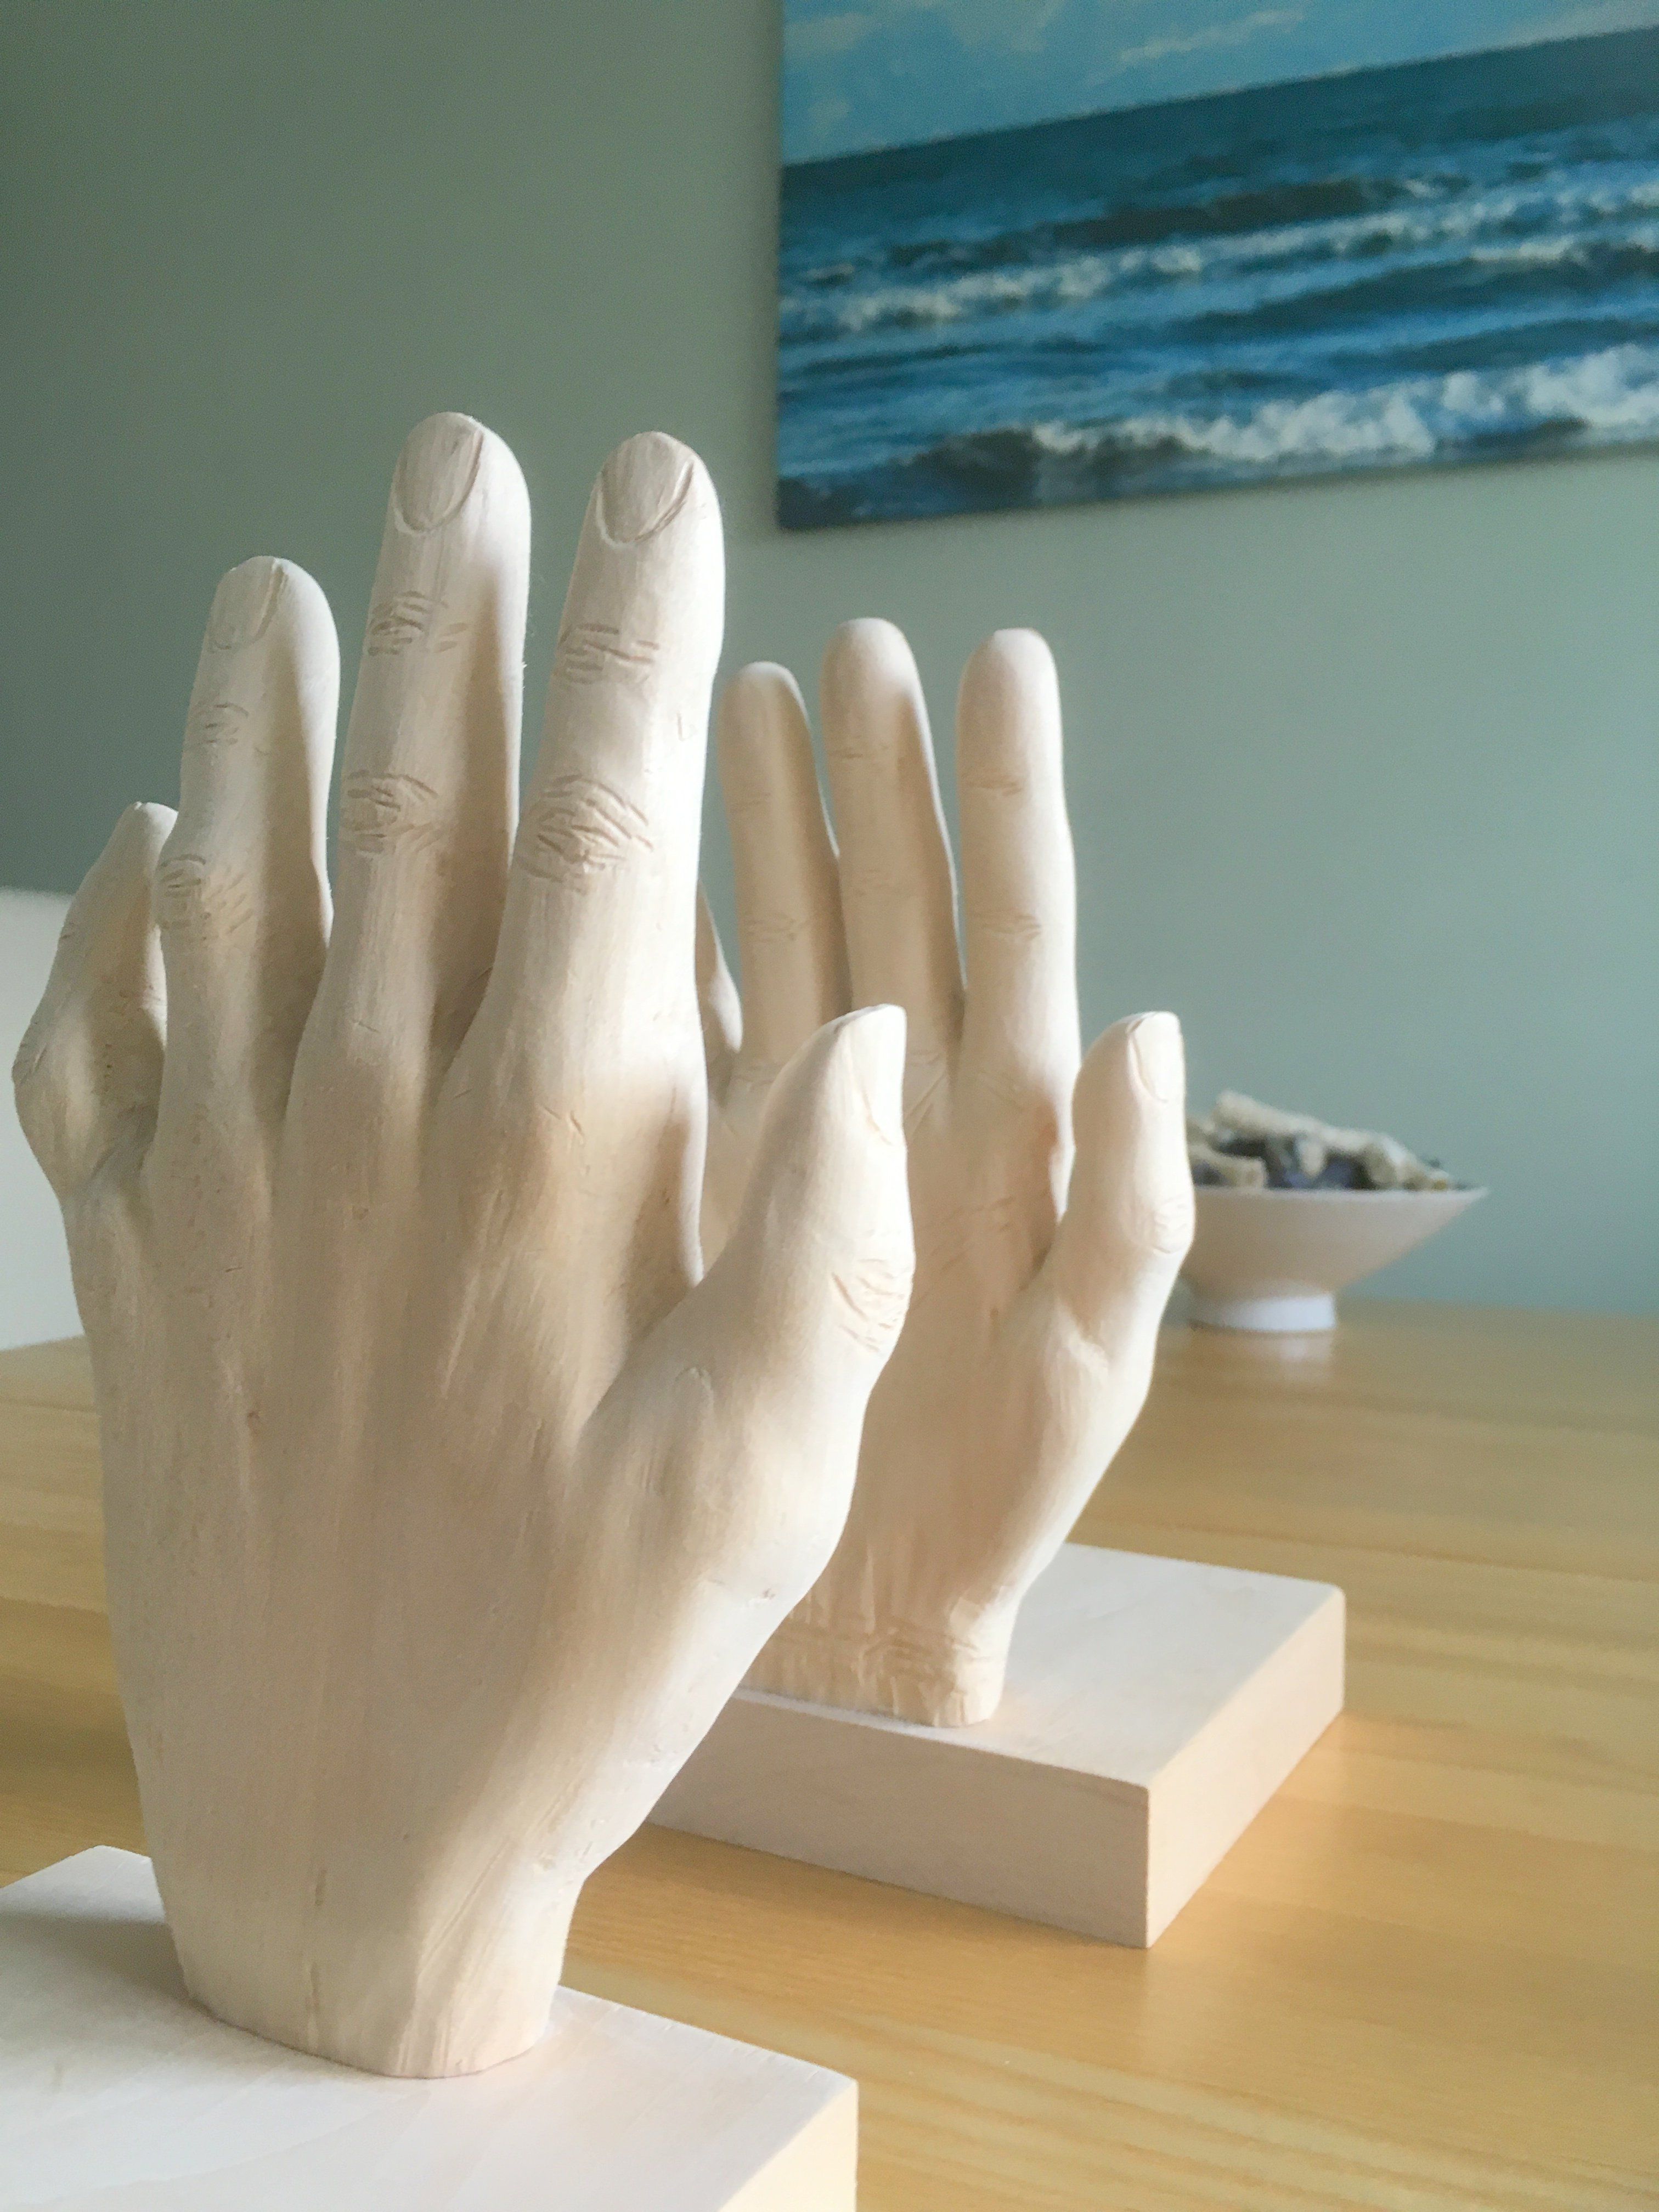 Wood carving. Carved hands. An attempt to carve my own hands out of ...